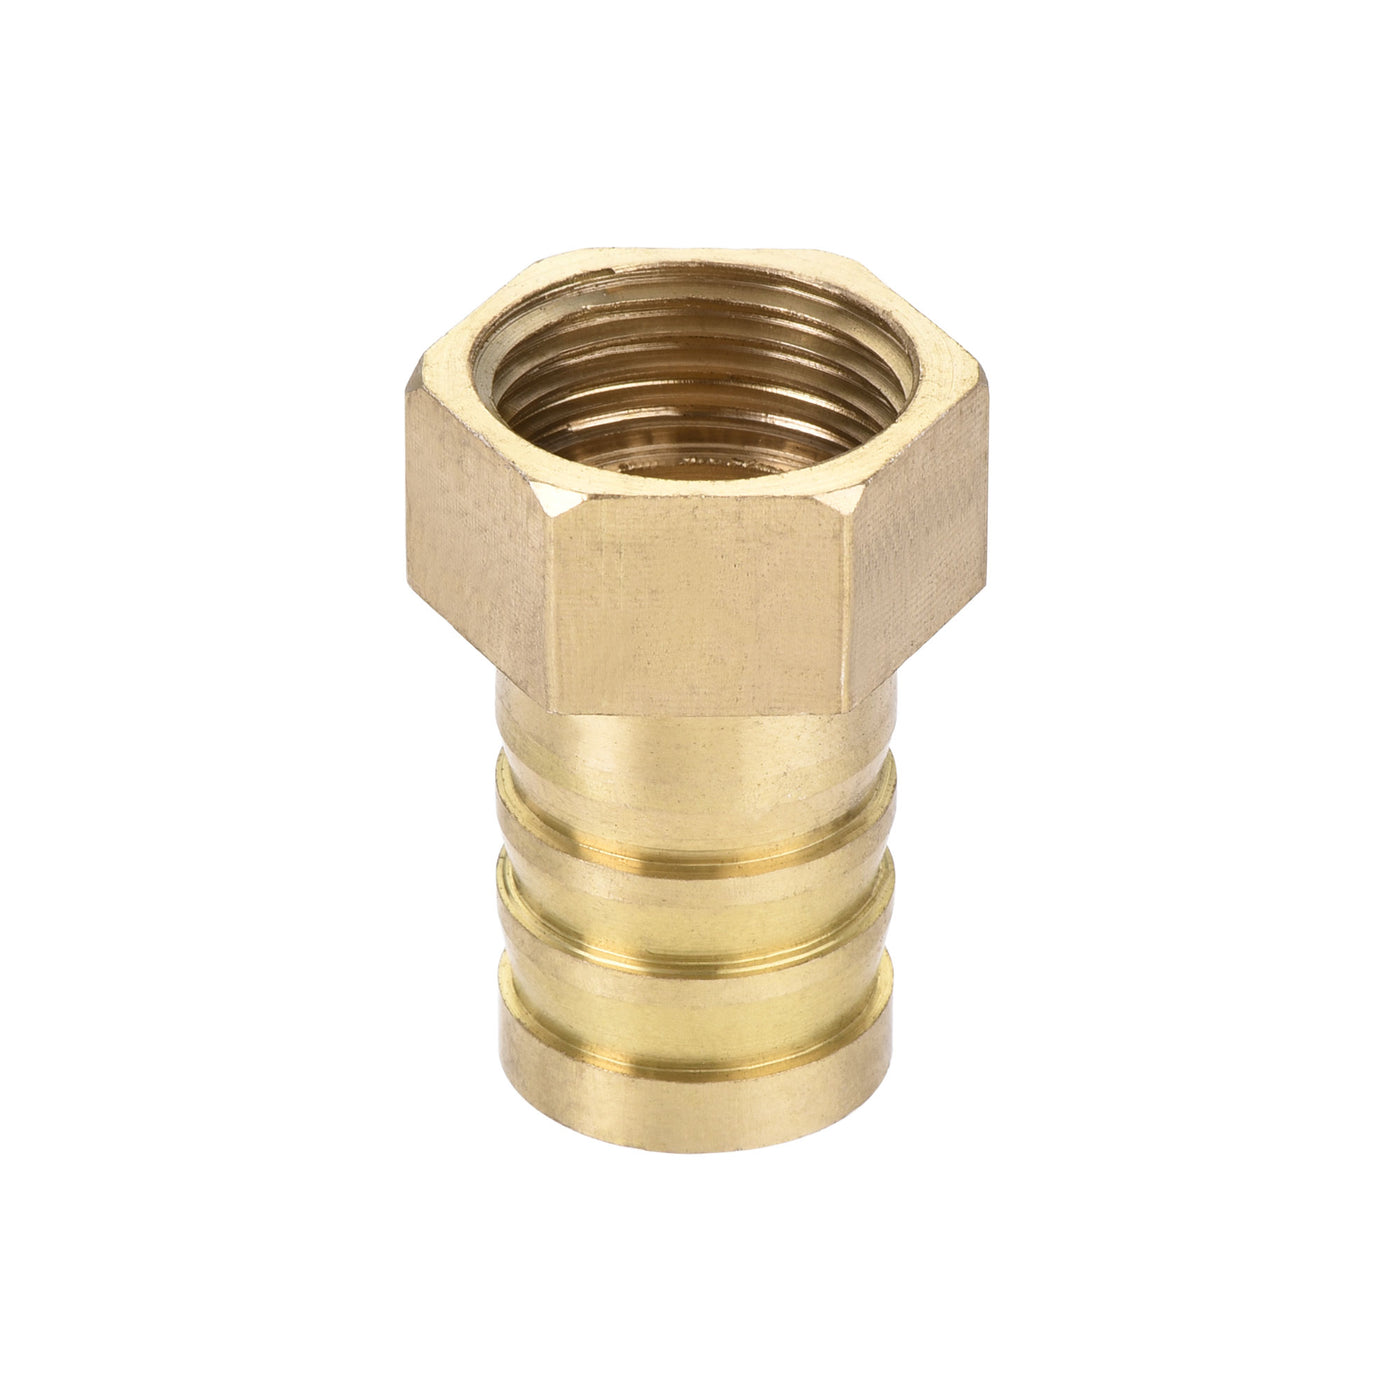 uxcell Uxcell Barb Hose Fitting Connector Adapter Barbed Female Pipe 2Set